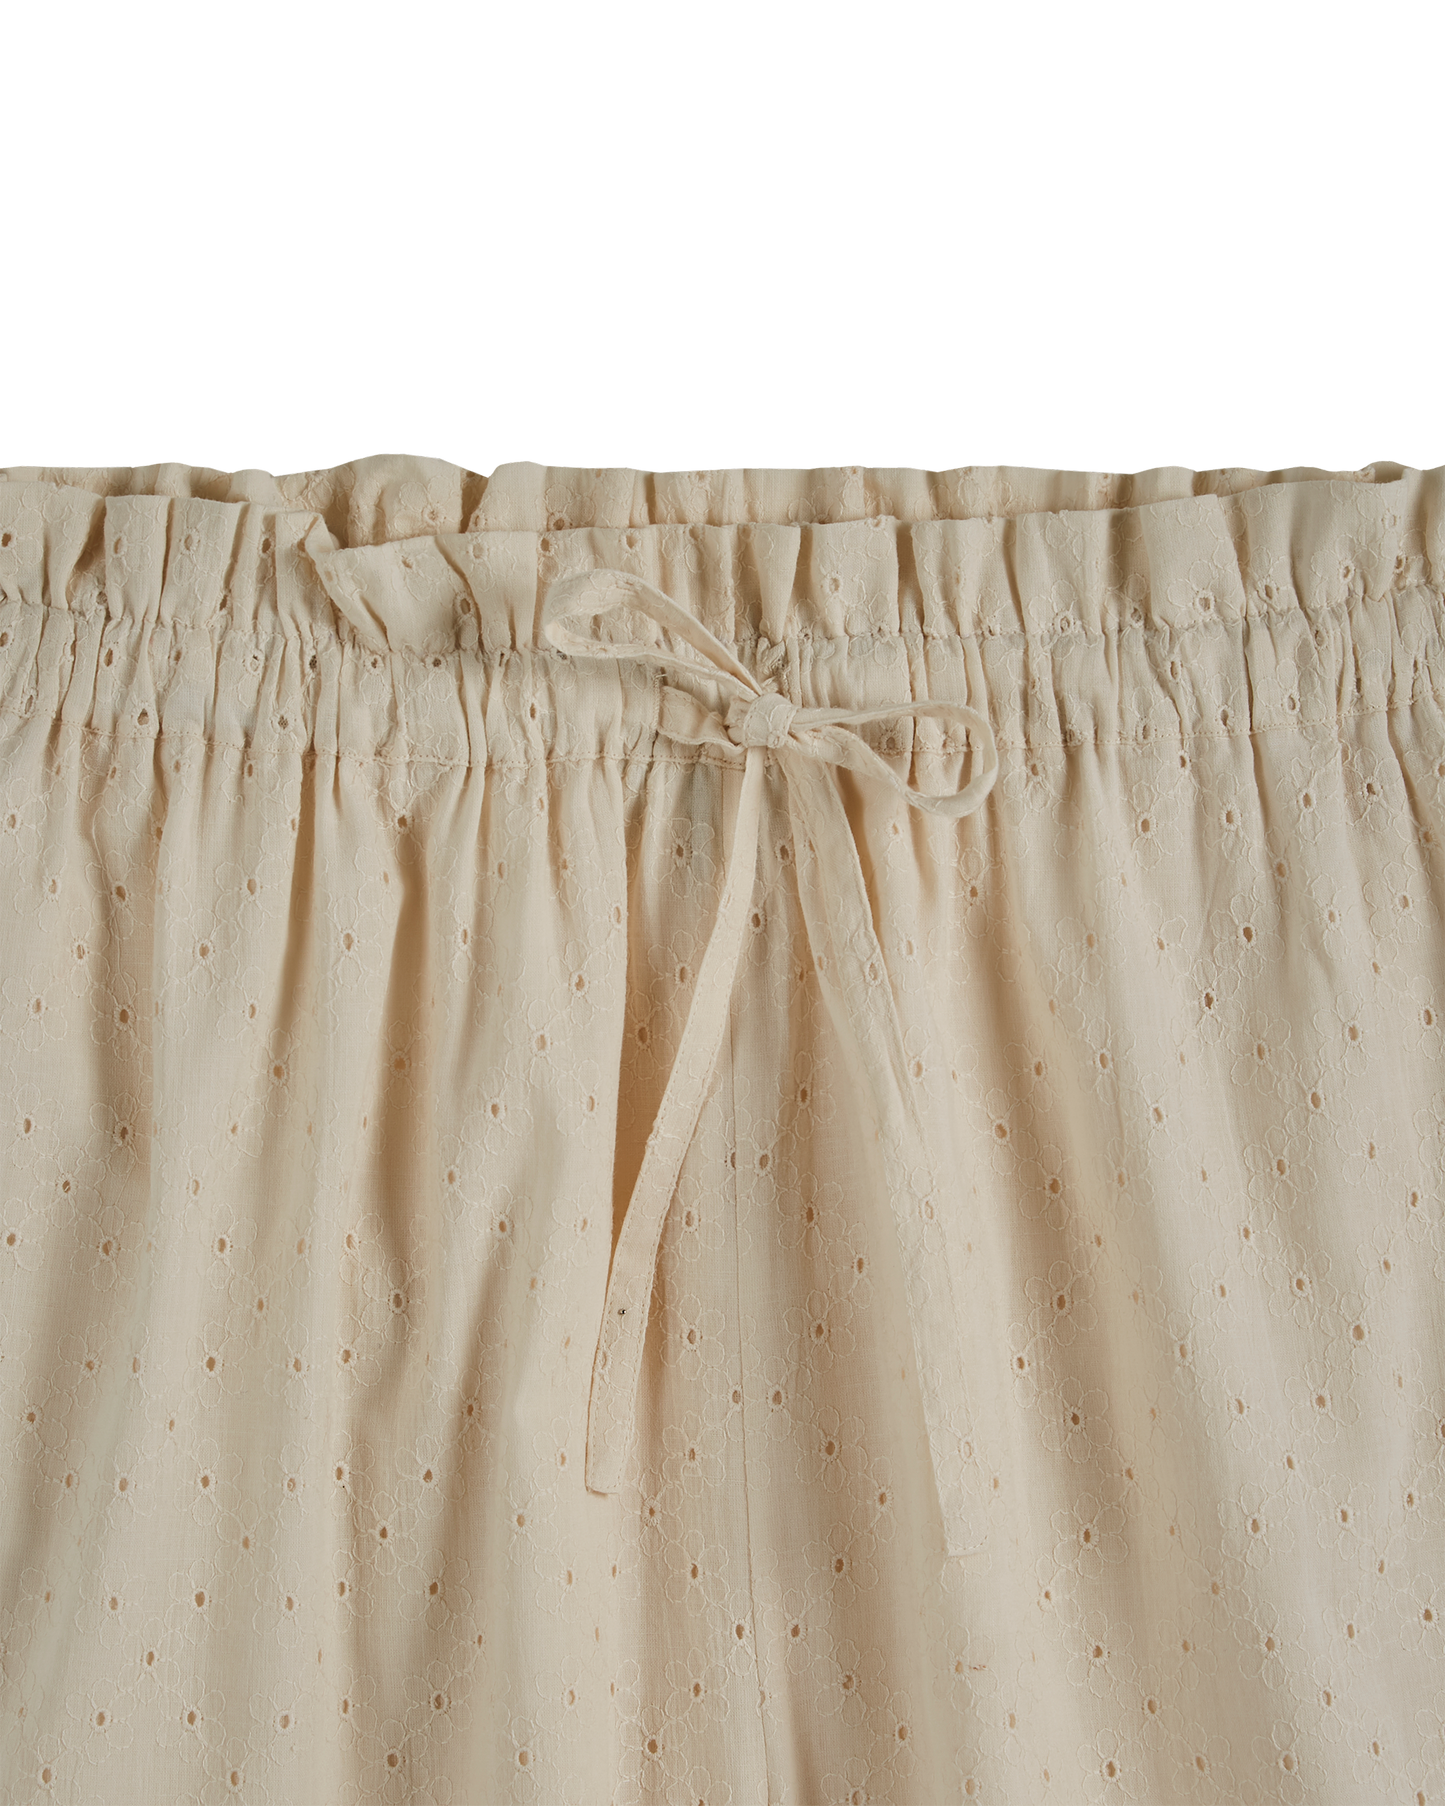 Short broderie anglaise chantilly